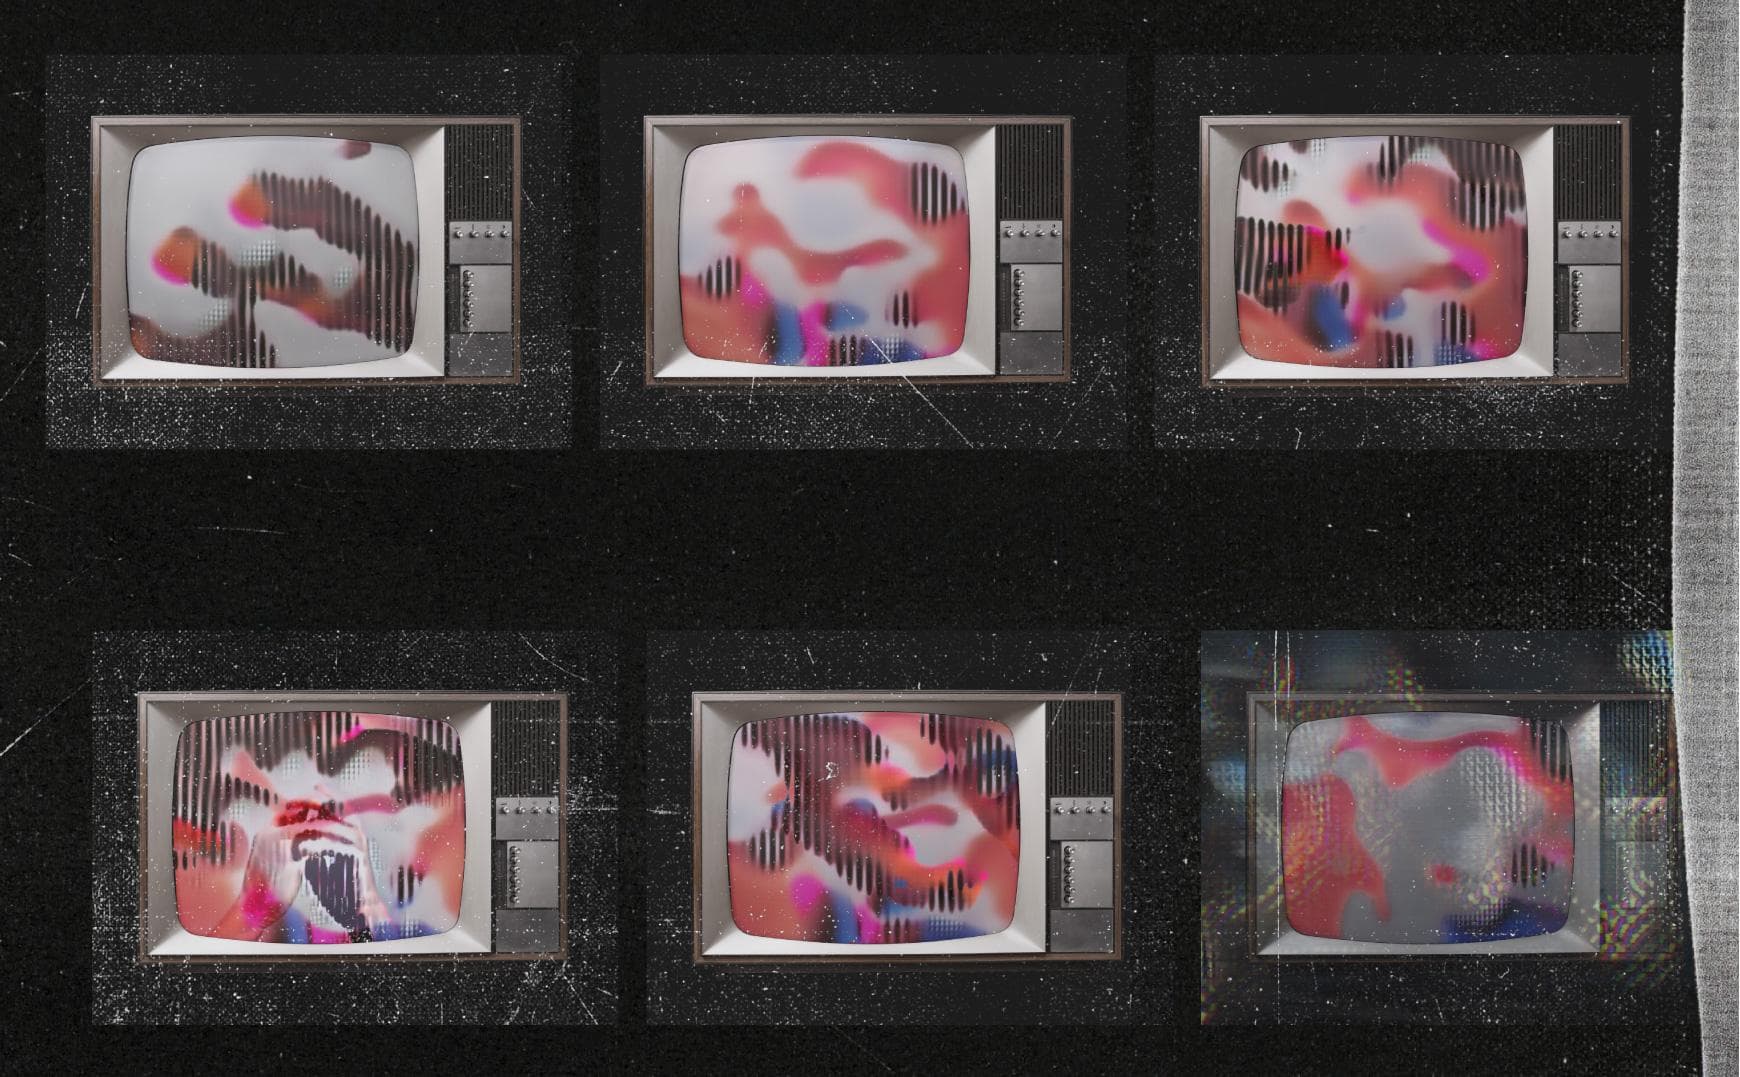 Six televisions featuring abstract imagery